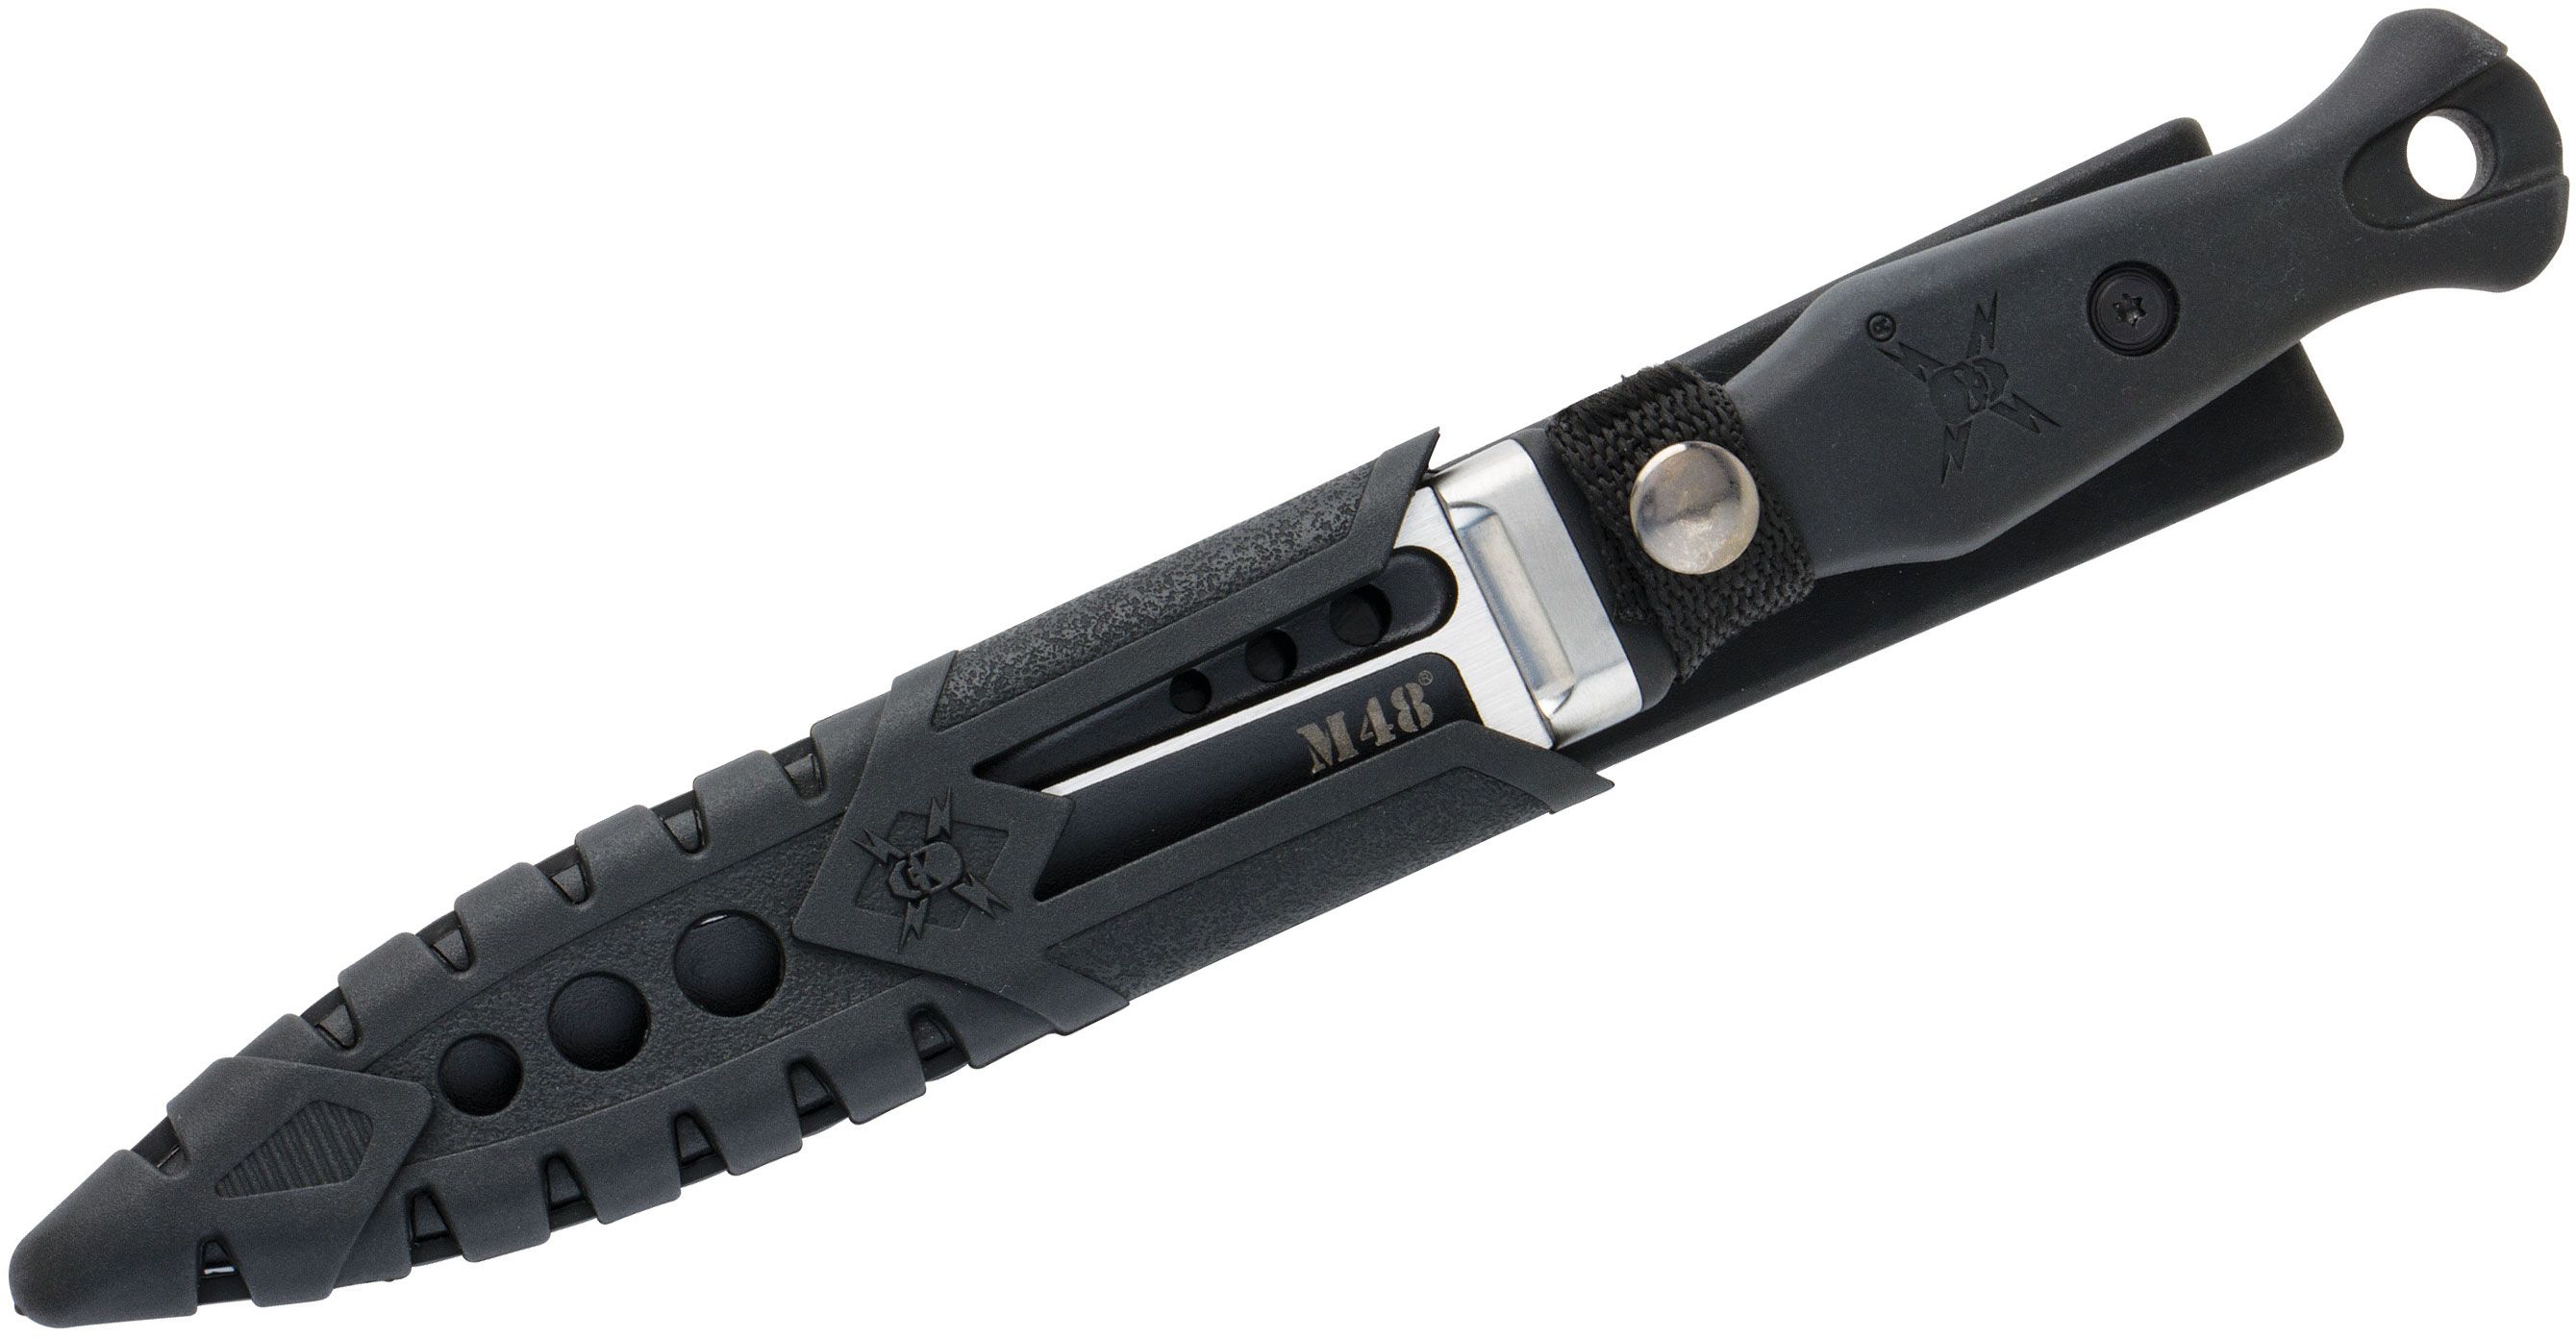 British Tactical: 5 inch 'Mad Jack' Knife Sheath • Spotter Up